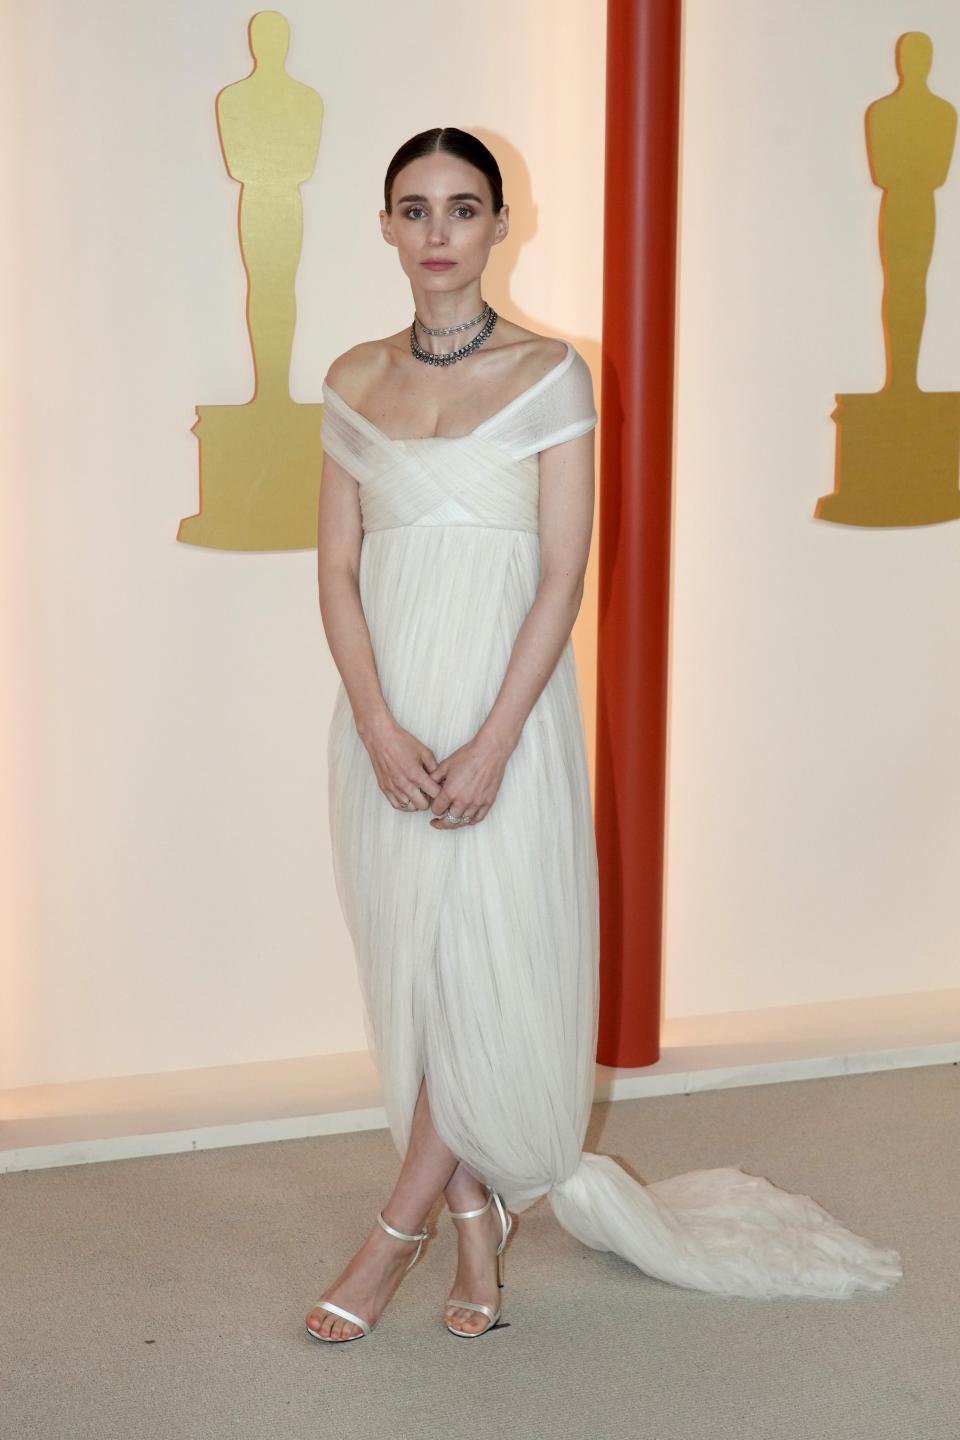 Rooney Mara attends the 2023 Academy Awards.